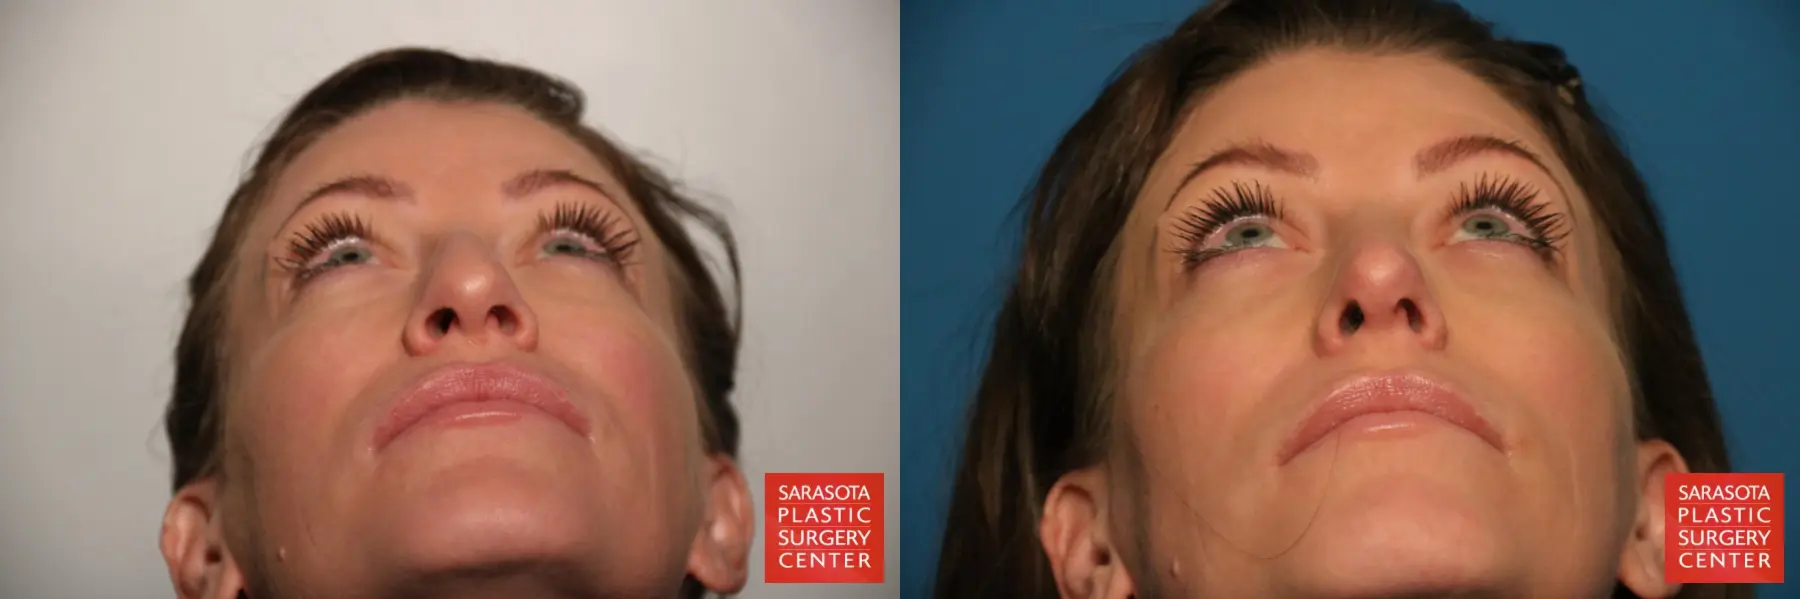 Rhinoplasty: Patient 6 - Before and After 4